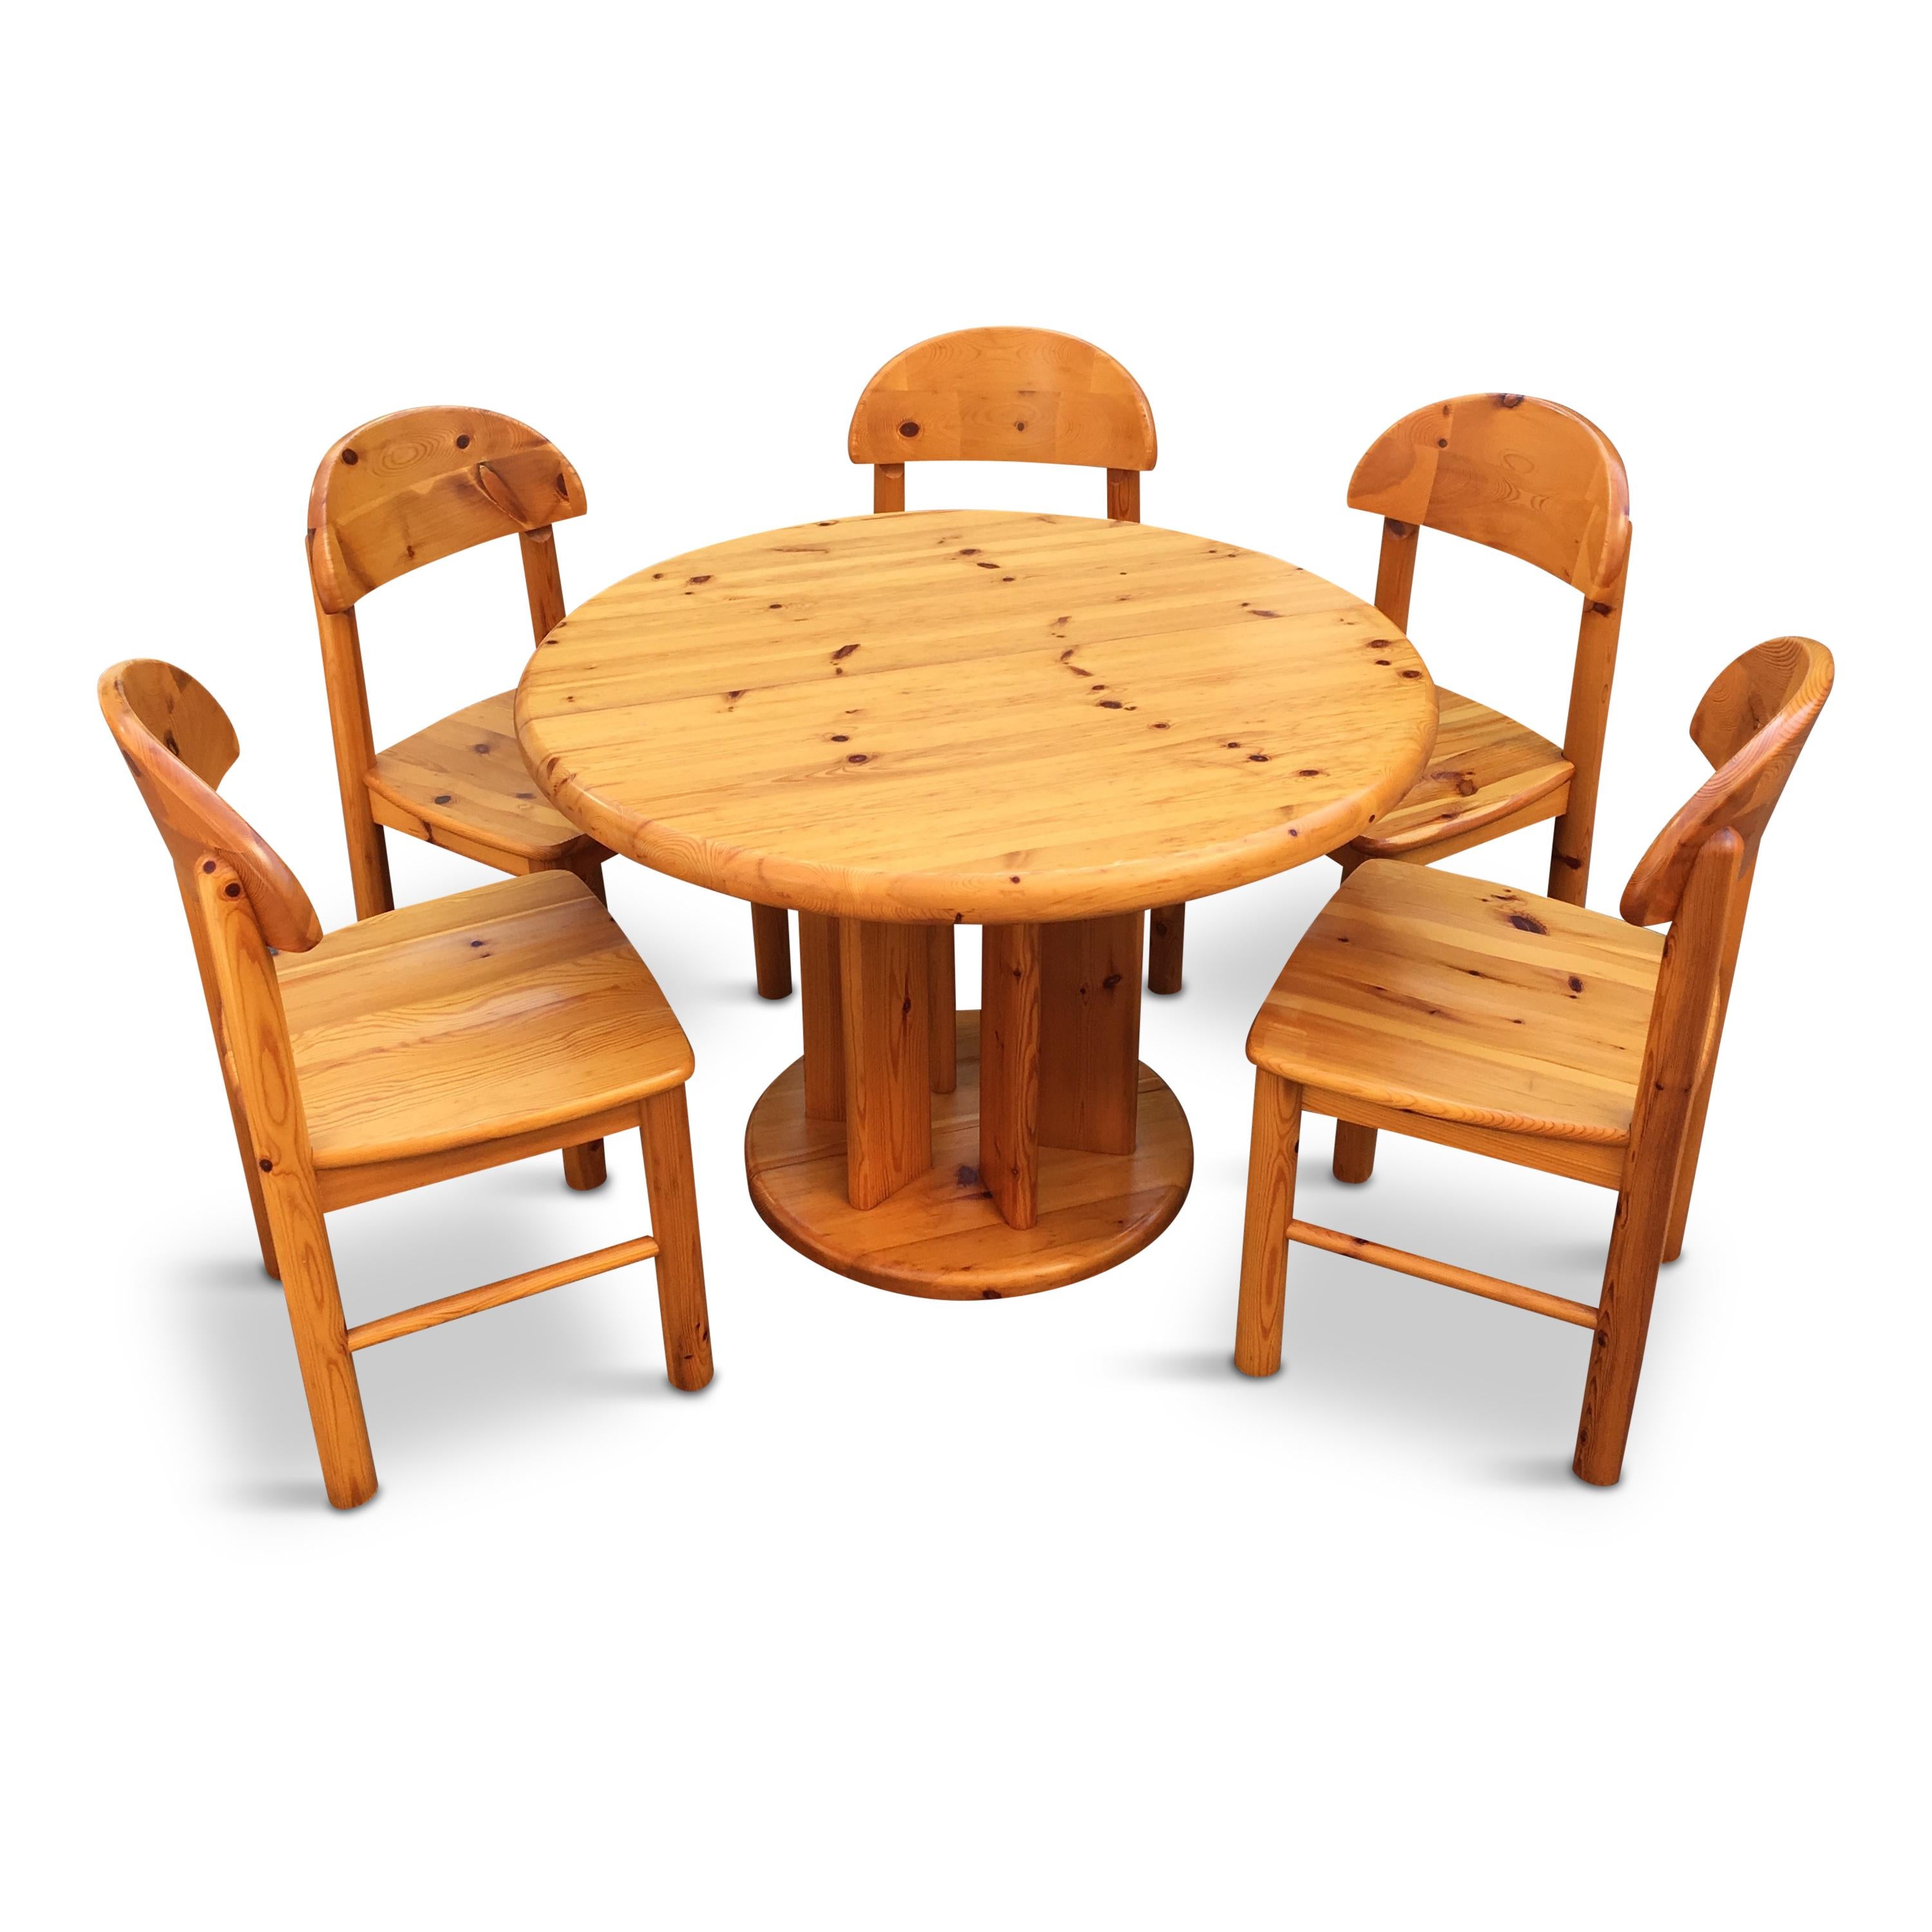 Extendable pedestal dining table with 5 dining chairs, the desk and the base are joined by 6 minimalistic columns. This set looks very sculptural. Great choice for a chalet or city residence.

Table:
H 73 cm
closed - D 107 cm
extended - D 107